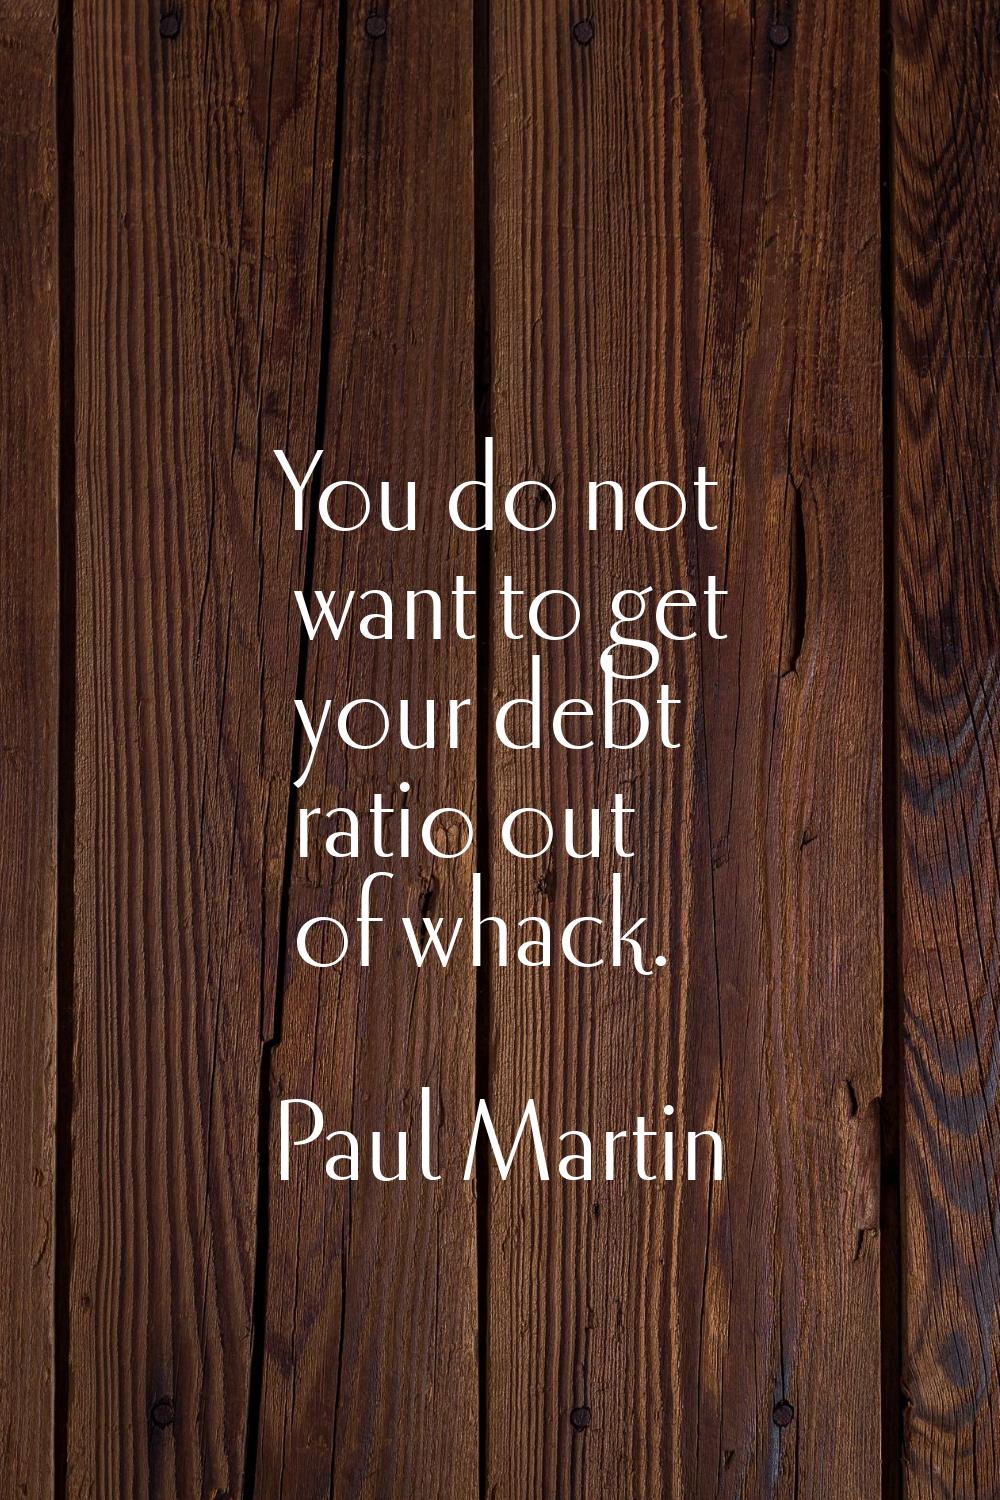 You do not want to get your debt ratio out of whack.